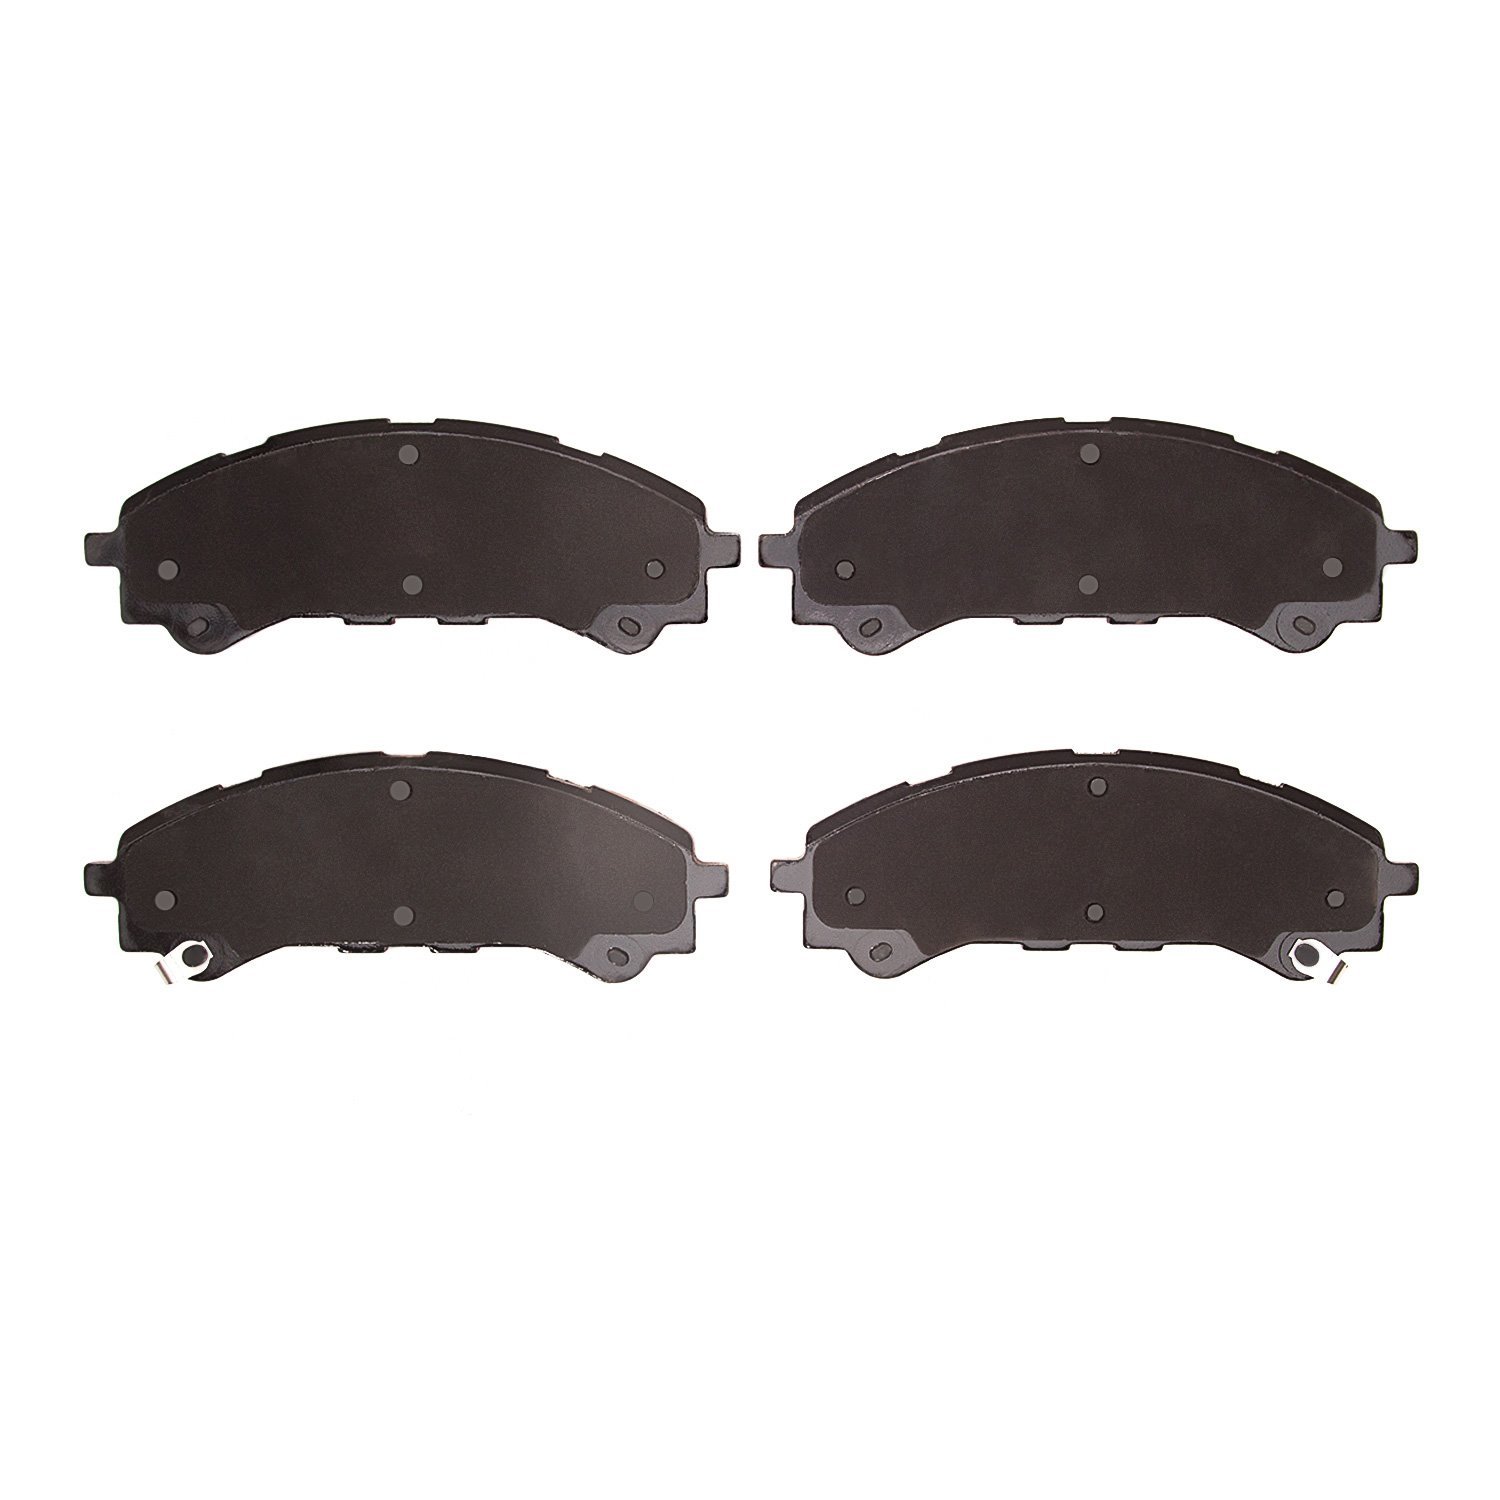 1310-2216-00 3000-Series Ceramic Brake Pads, Fits Select Ford/Lincoln/Mercury/Mazda, Position: Front